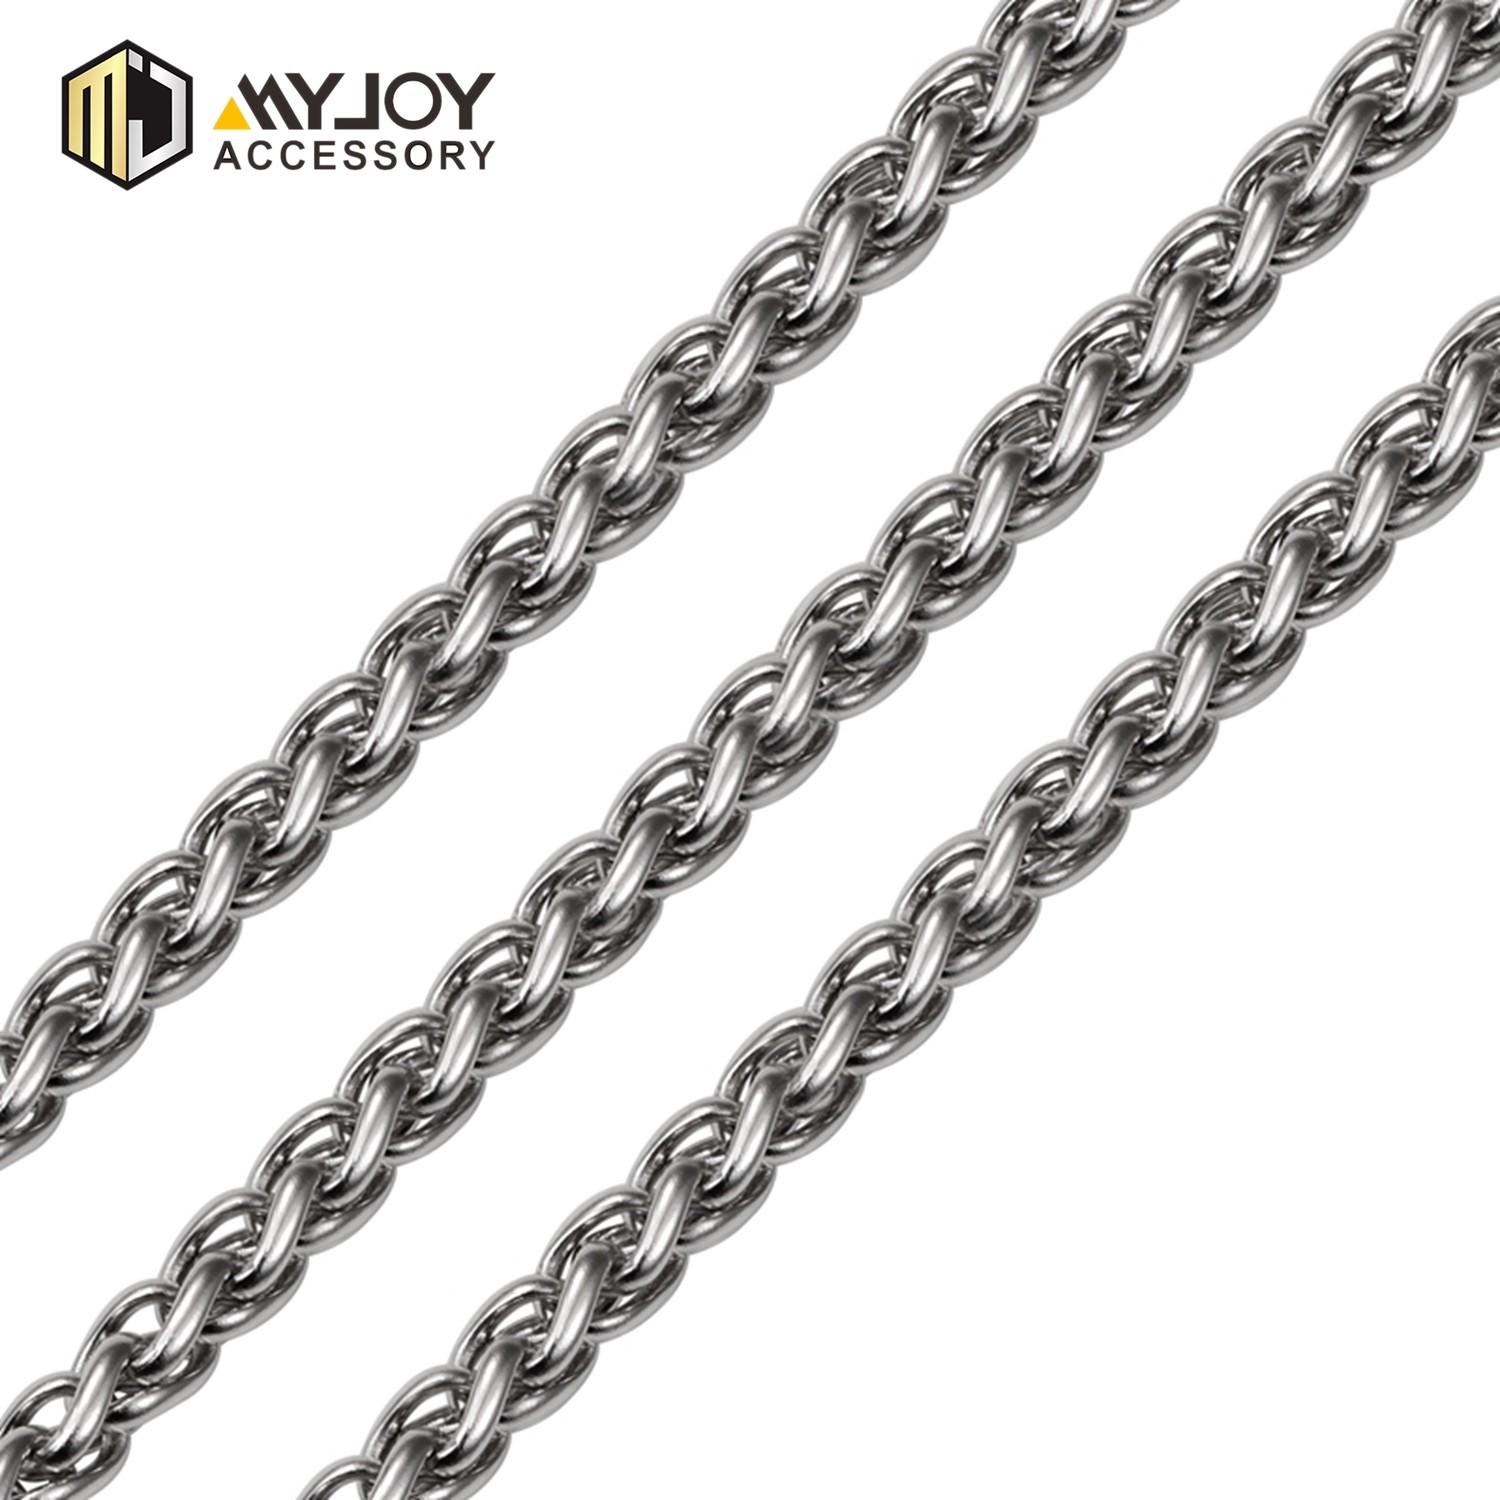 MYJOY new handbag chain strap manufacturers for bags-3